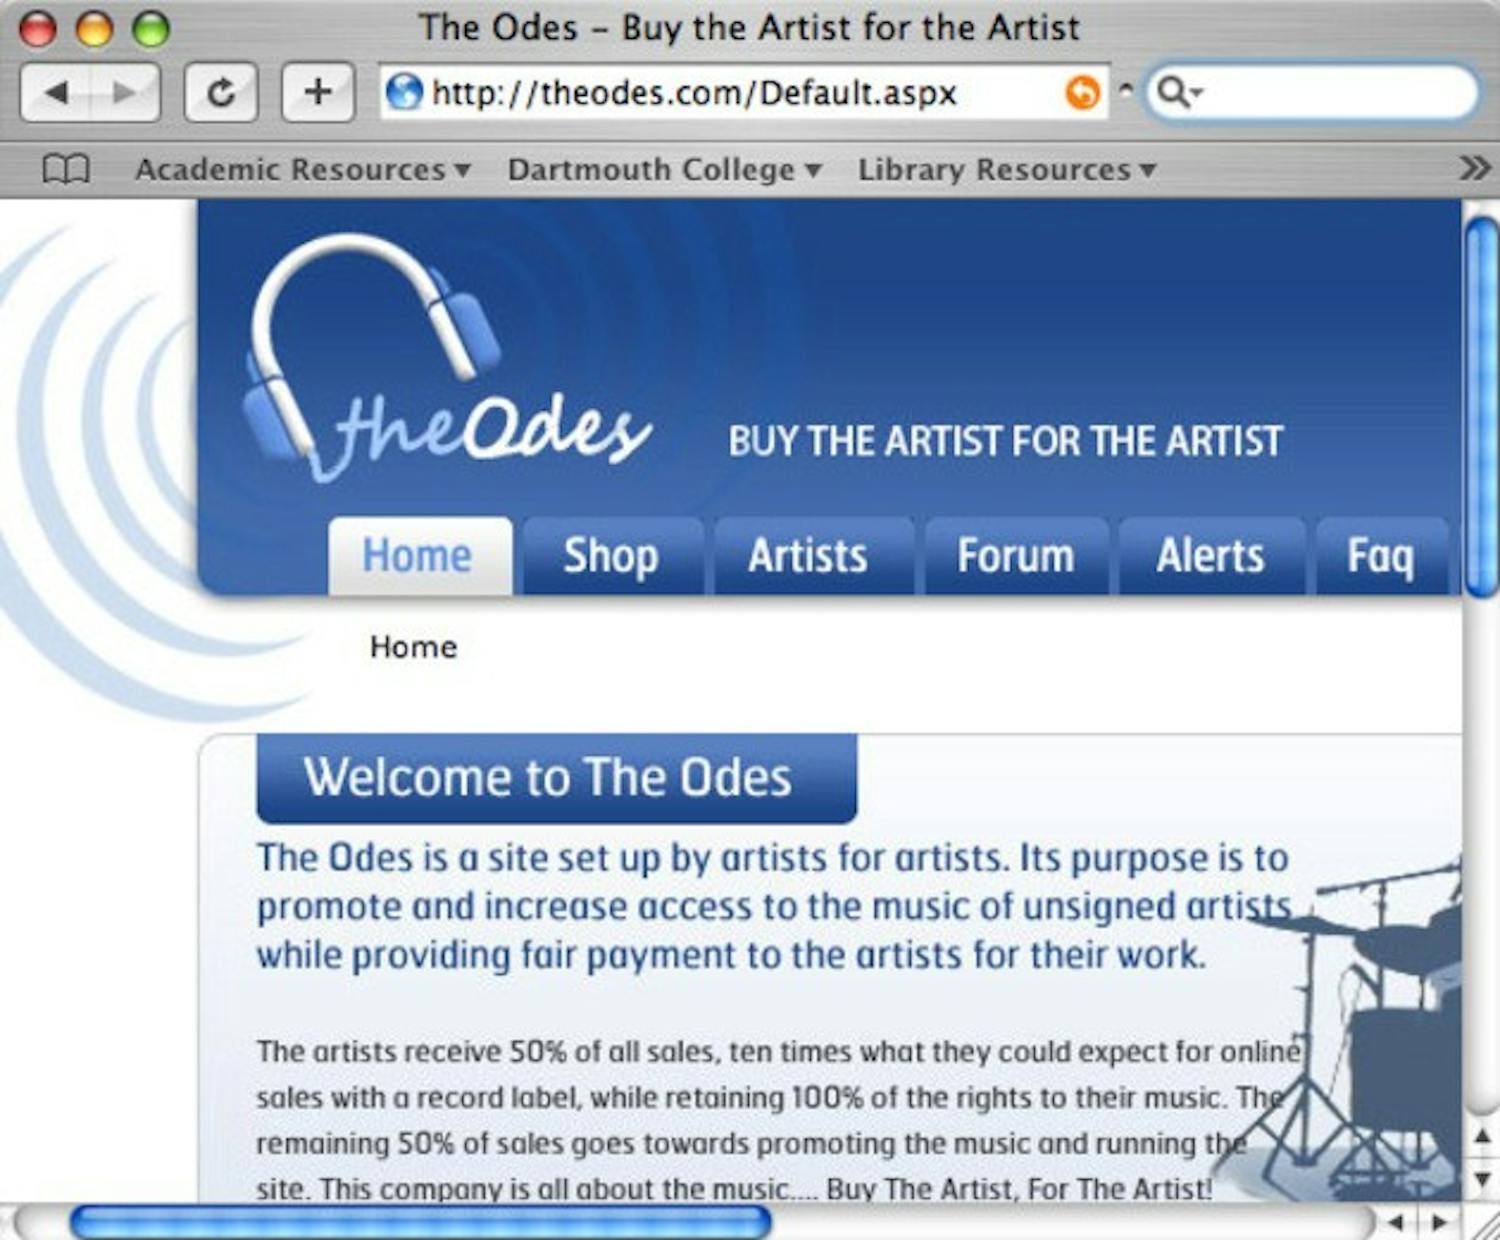 The Odes is building a community that unsigned artists can join for free to sell their music.